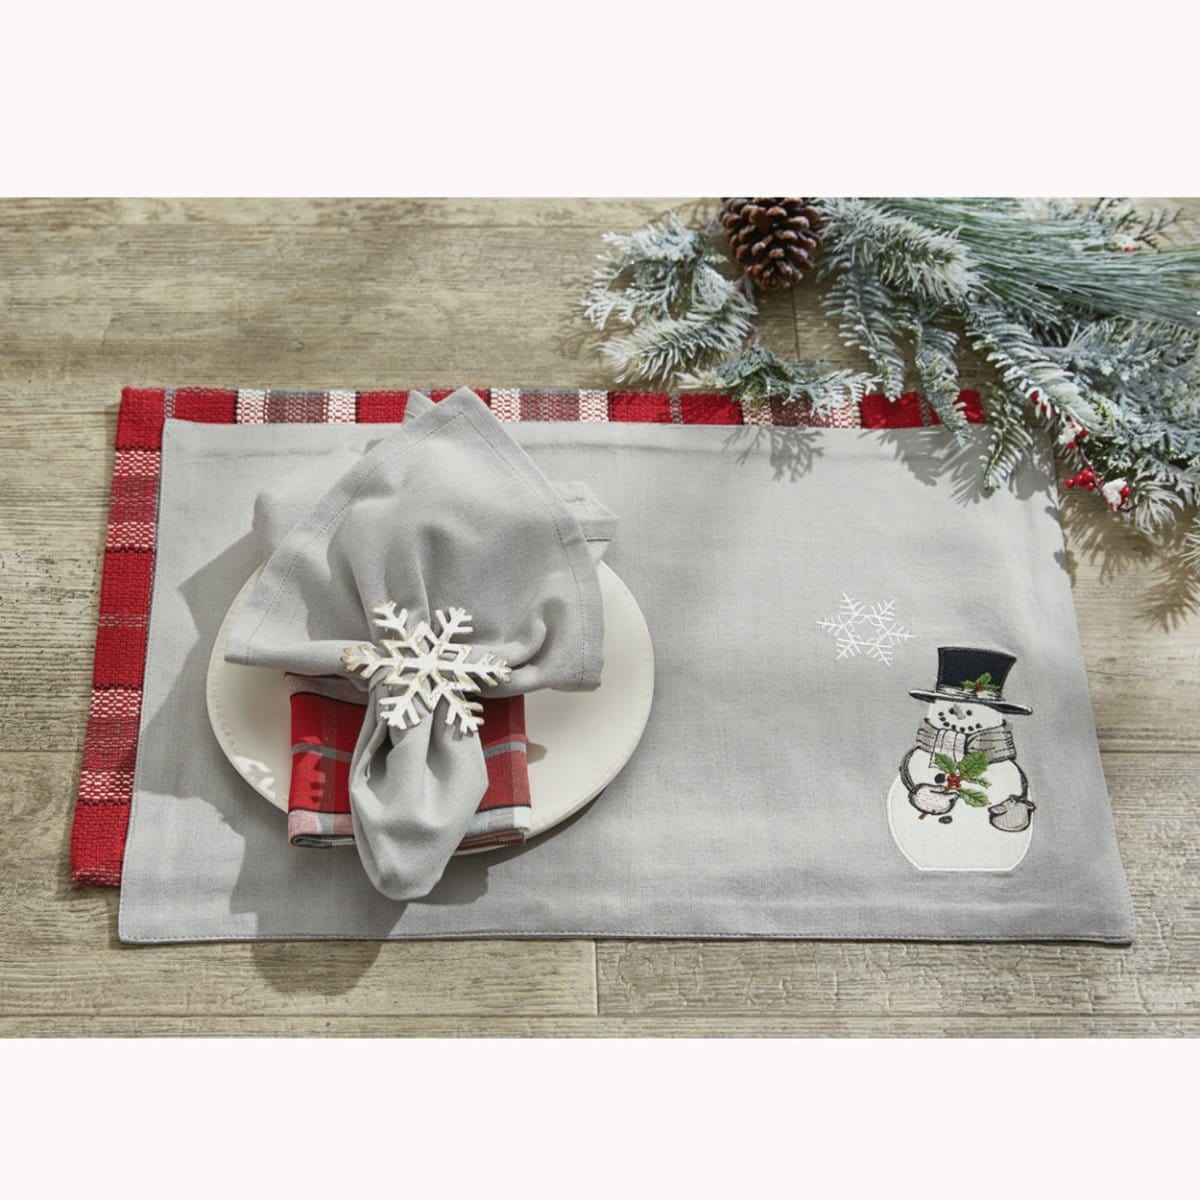 Snowman &amp; Holly Appliqued &amp; Embroidered Placemat-Park Designs-The Village Merchant